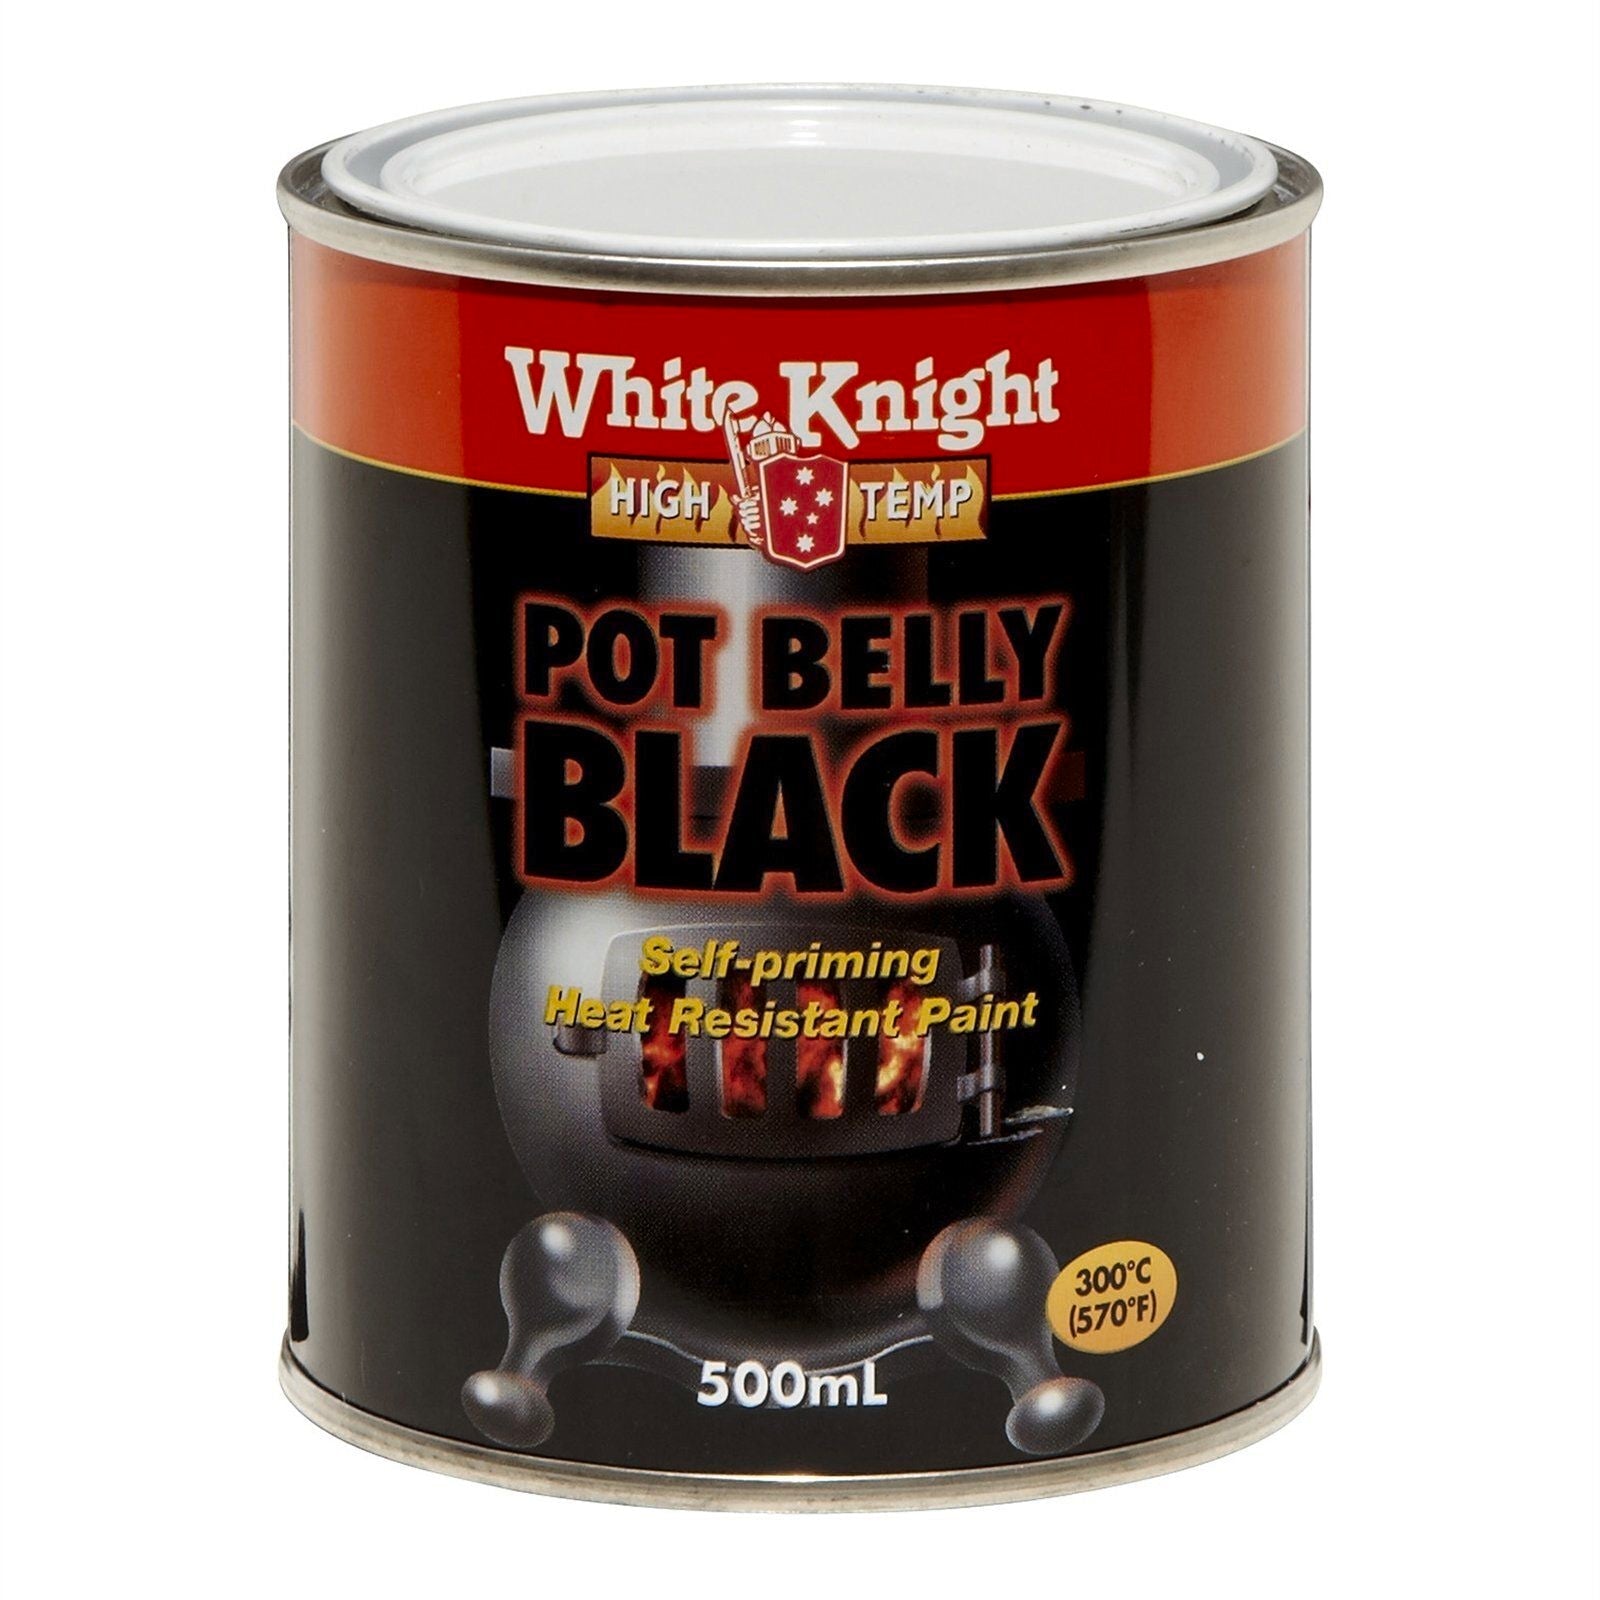 White Knight Pot Belly Black High Temp Heat Resistant Paint 500ml 395051/500ML - Double Bay Hardware